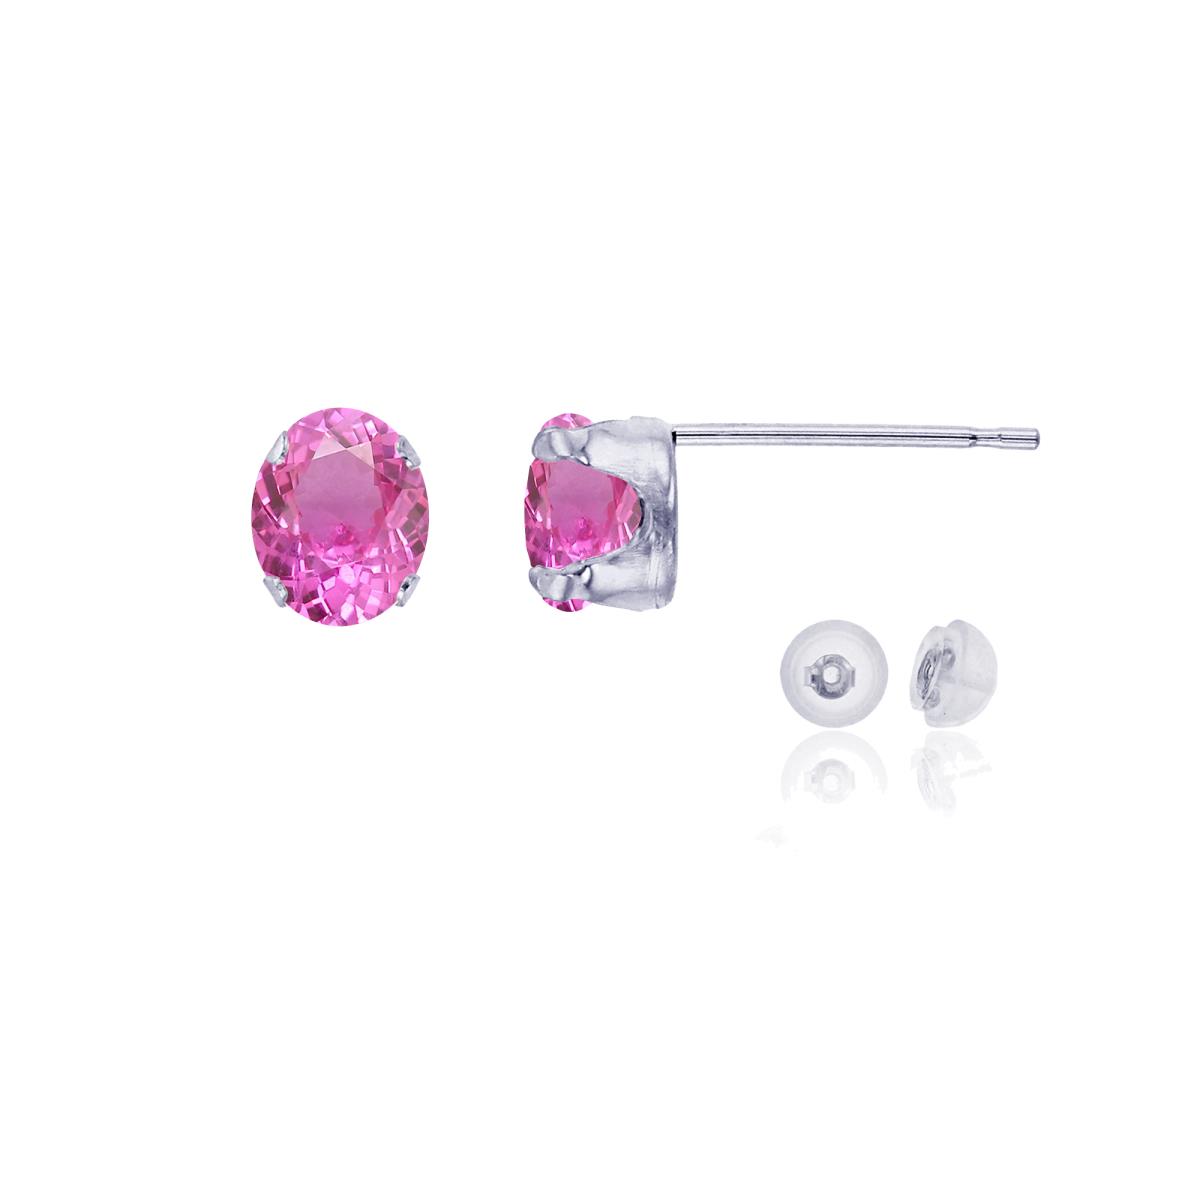 10K White Gold 6x4mm Oval Cr Pink Sapphire Stud Earring with Silicone Back